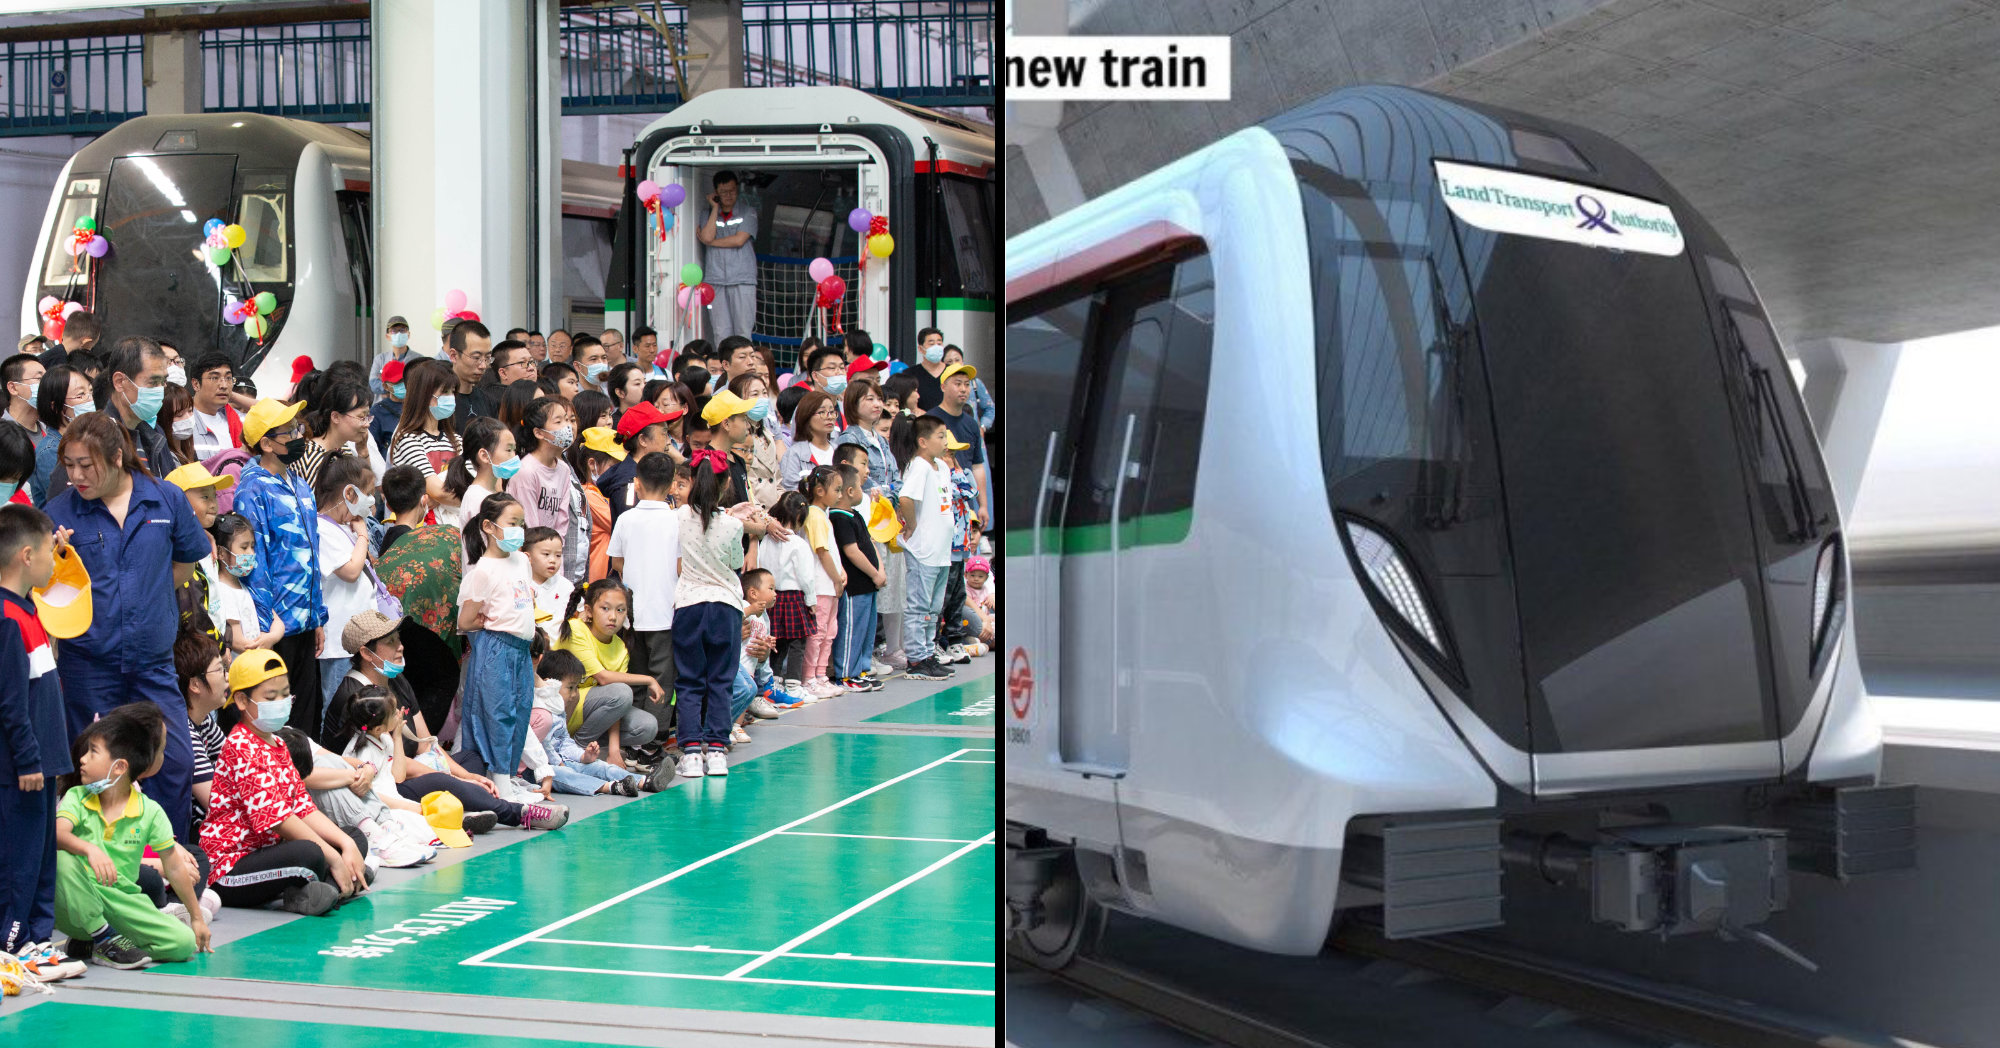 New 7th Generation R151 Trains for the North-South and East-West Lines Spotted During Children’s Day Celebration in China